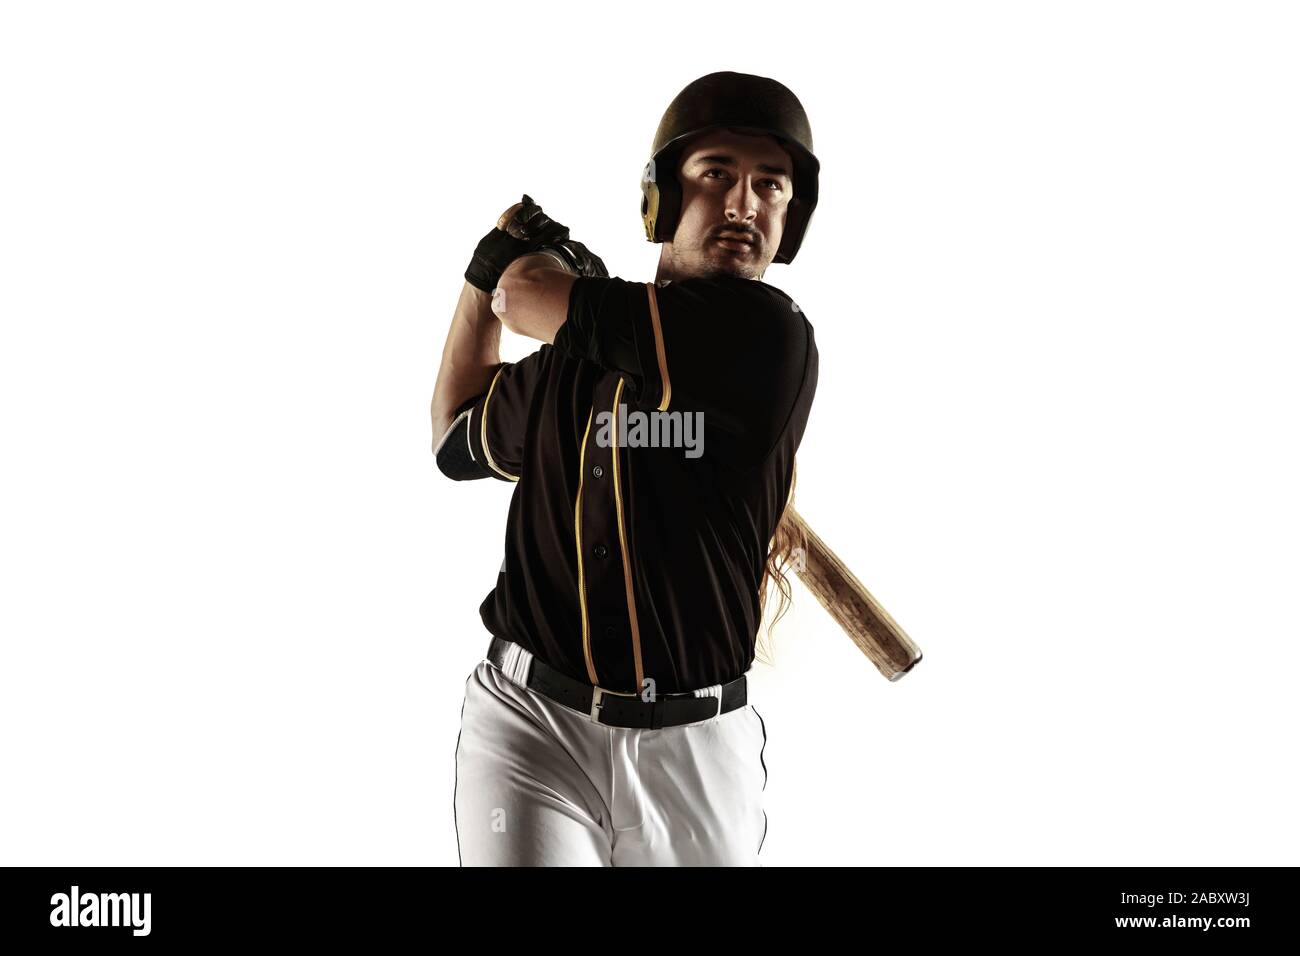 Baseball player, pitcher in a black uniform practicing and training isolated on a white background. Young professional sportsman in action and motion. Healthy lifestyle, sport, movement concept. Stock Photo